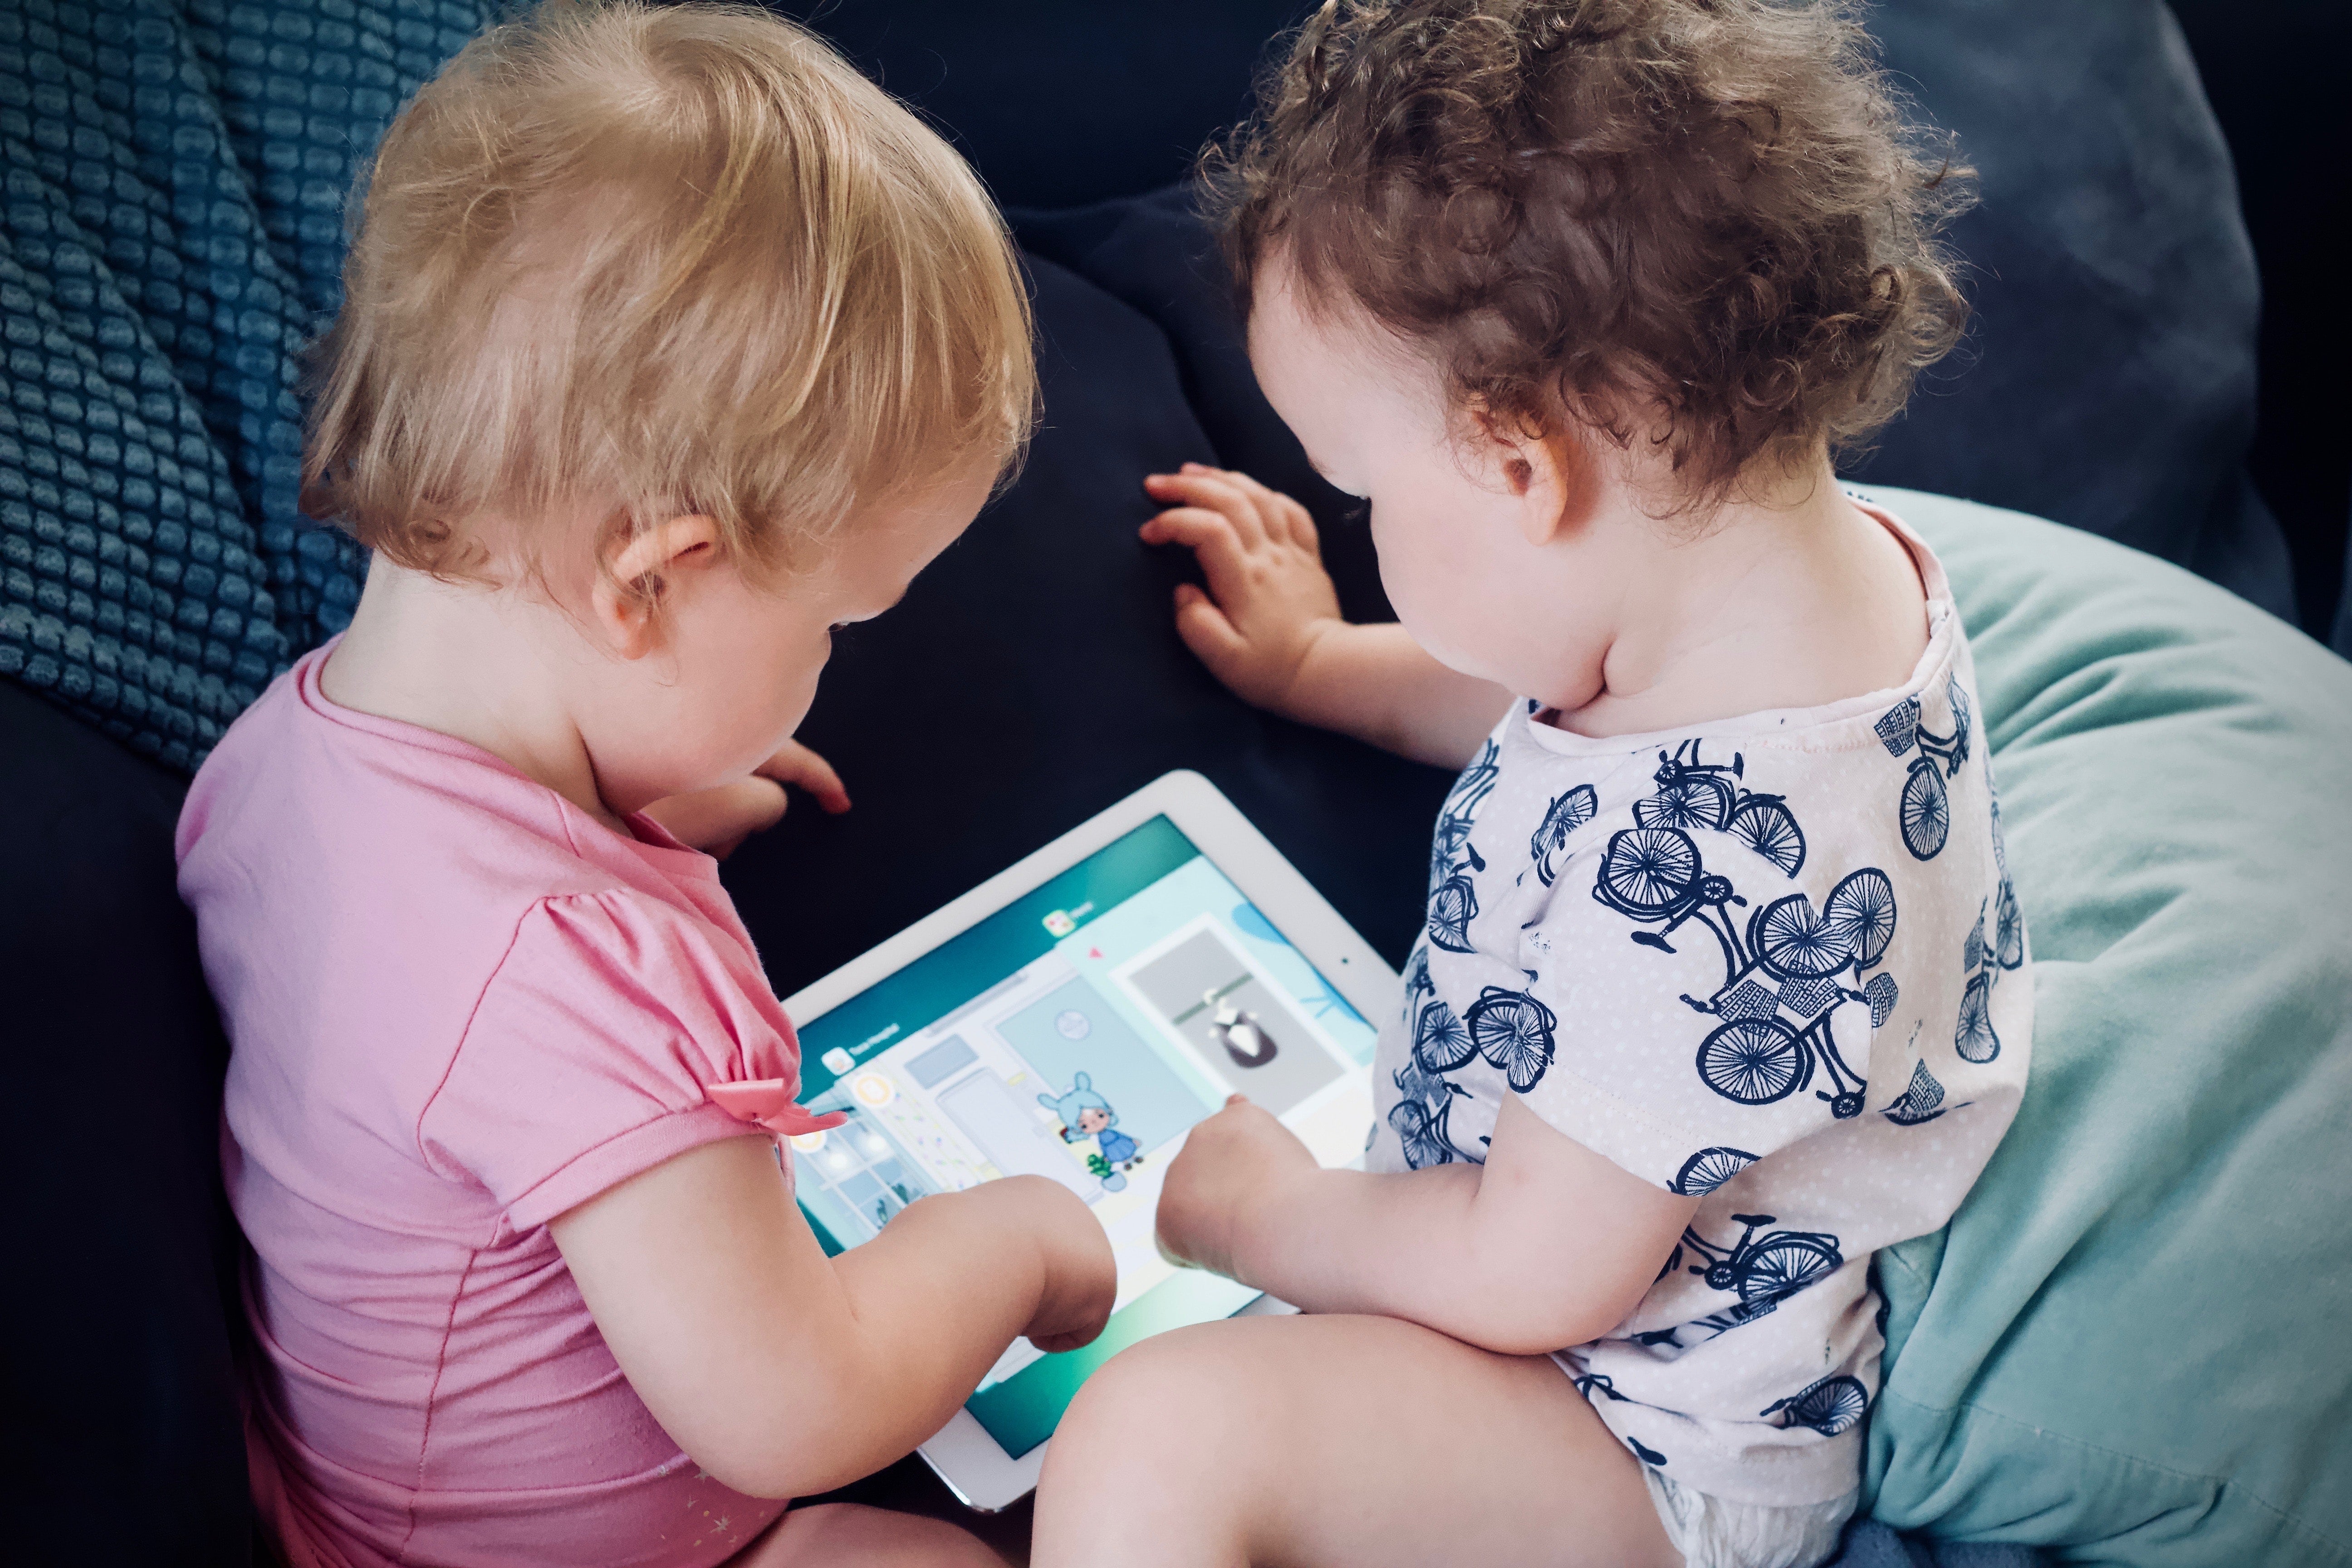 Toddlers Playing on a Tablet Together - Sibling Photo Idea